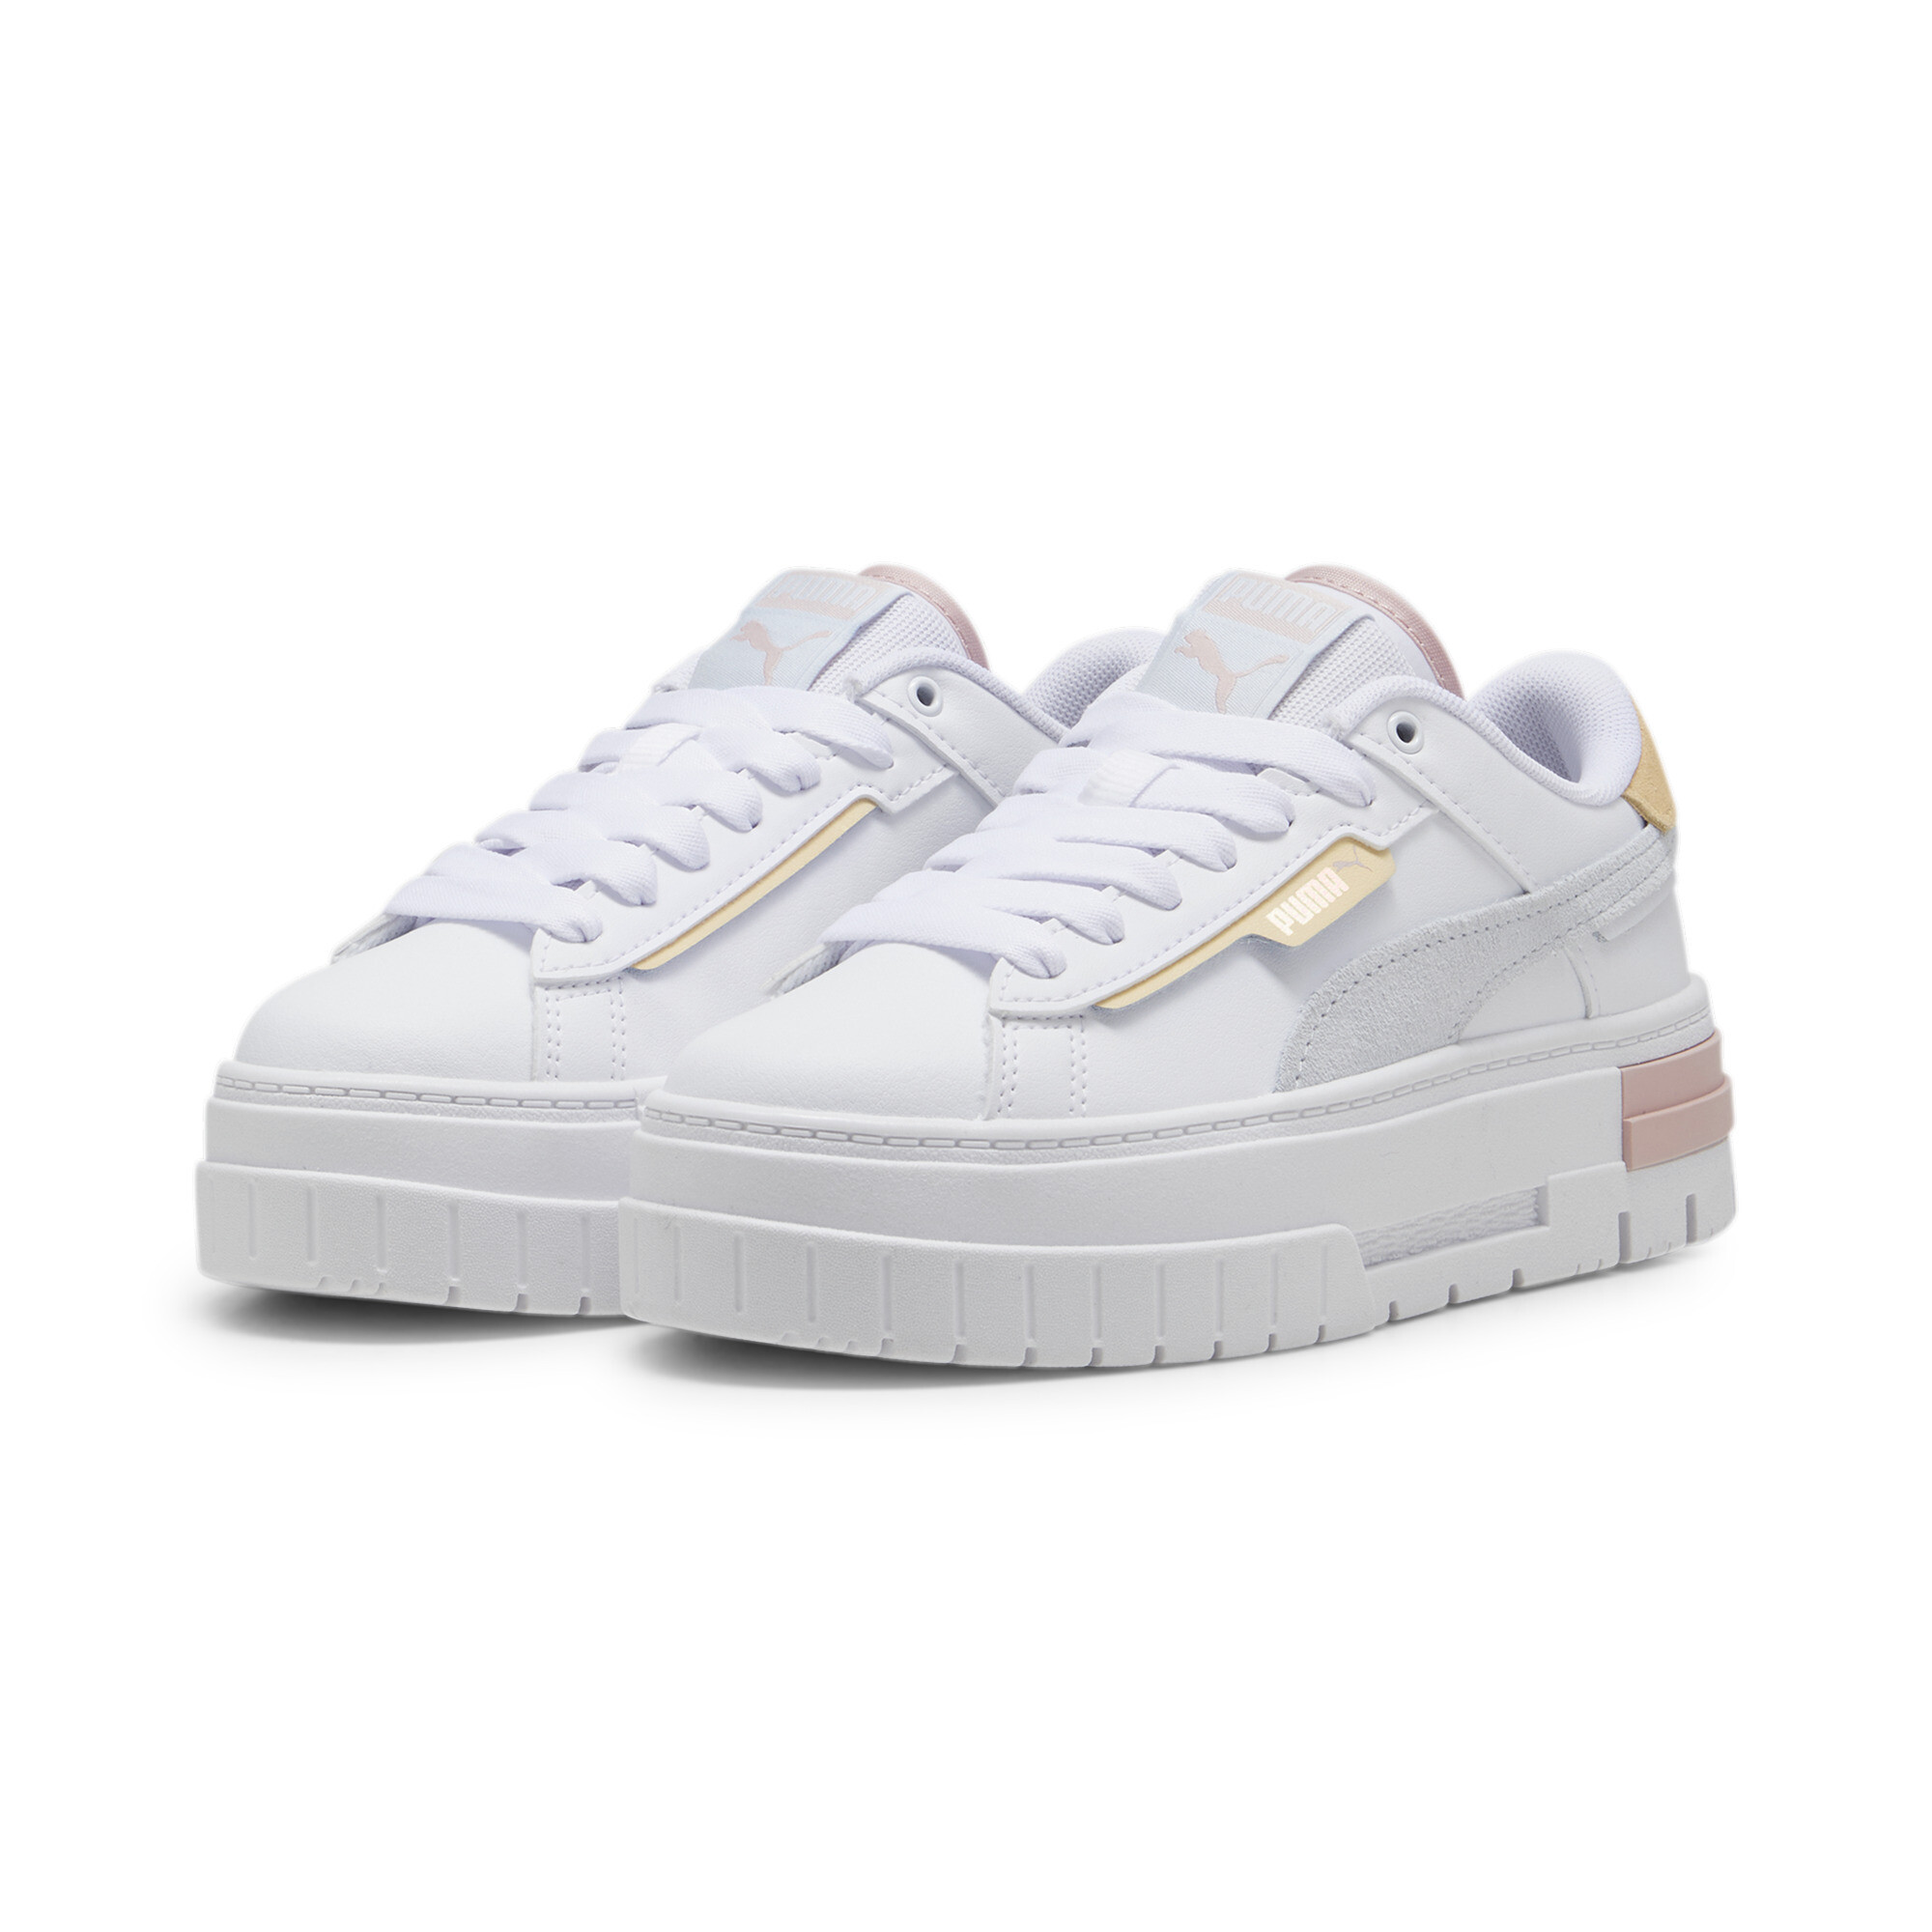 Women's Puma Mayze Crashed Youth Sneakers, White, Size 39, Shoes